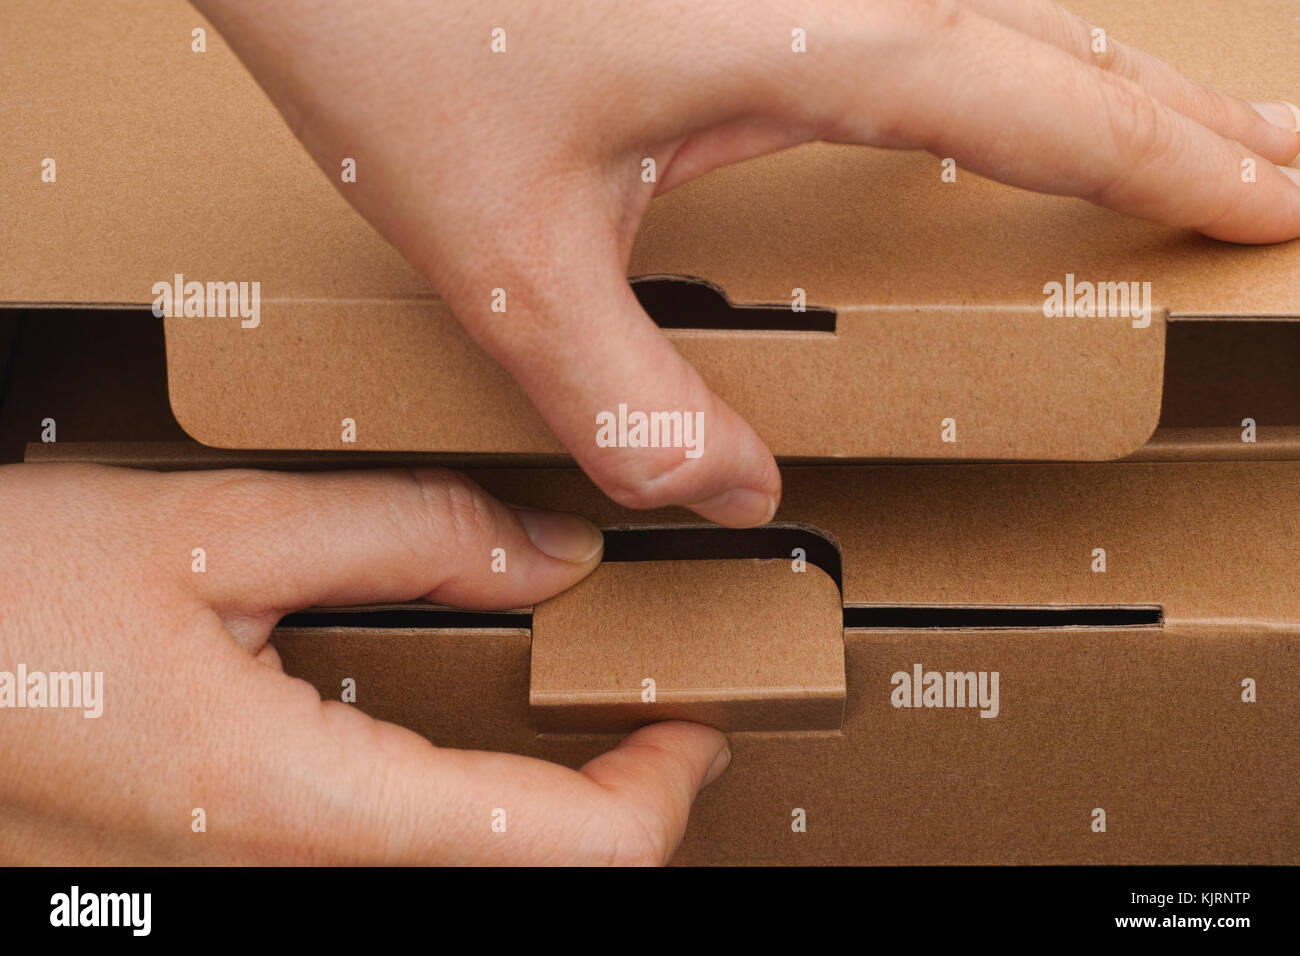 Person hands opening a cardboard box. Close-up. Stock Photo